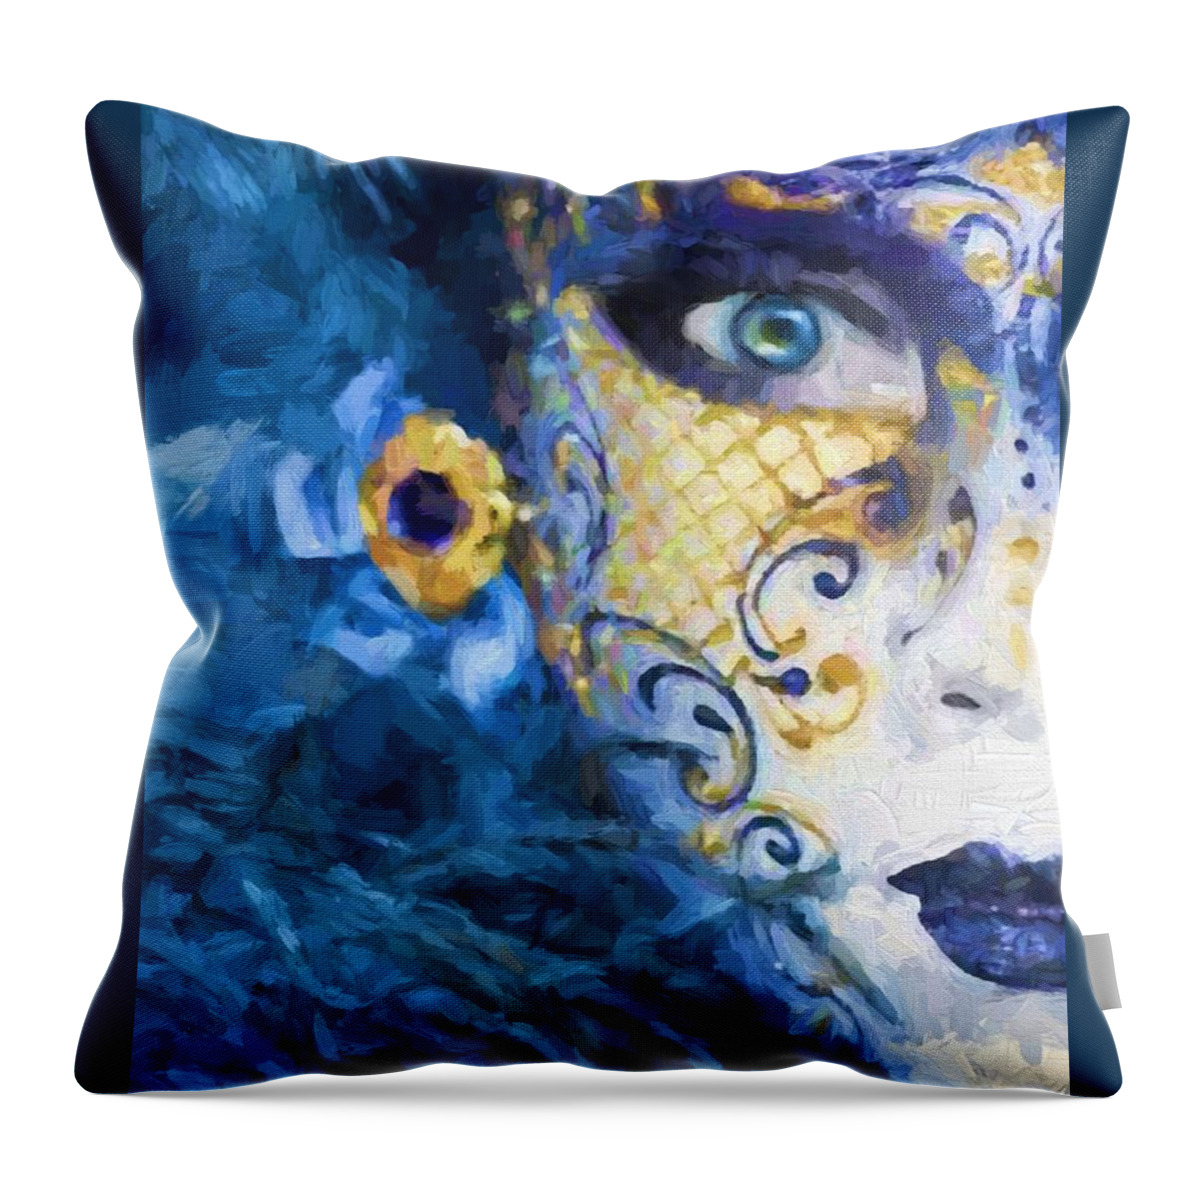 Mask Throw Pillow featuring the digital art Masquerade I by Charmaine Zoe